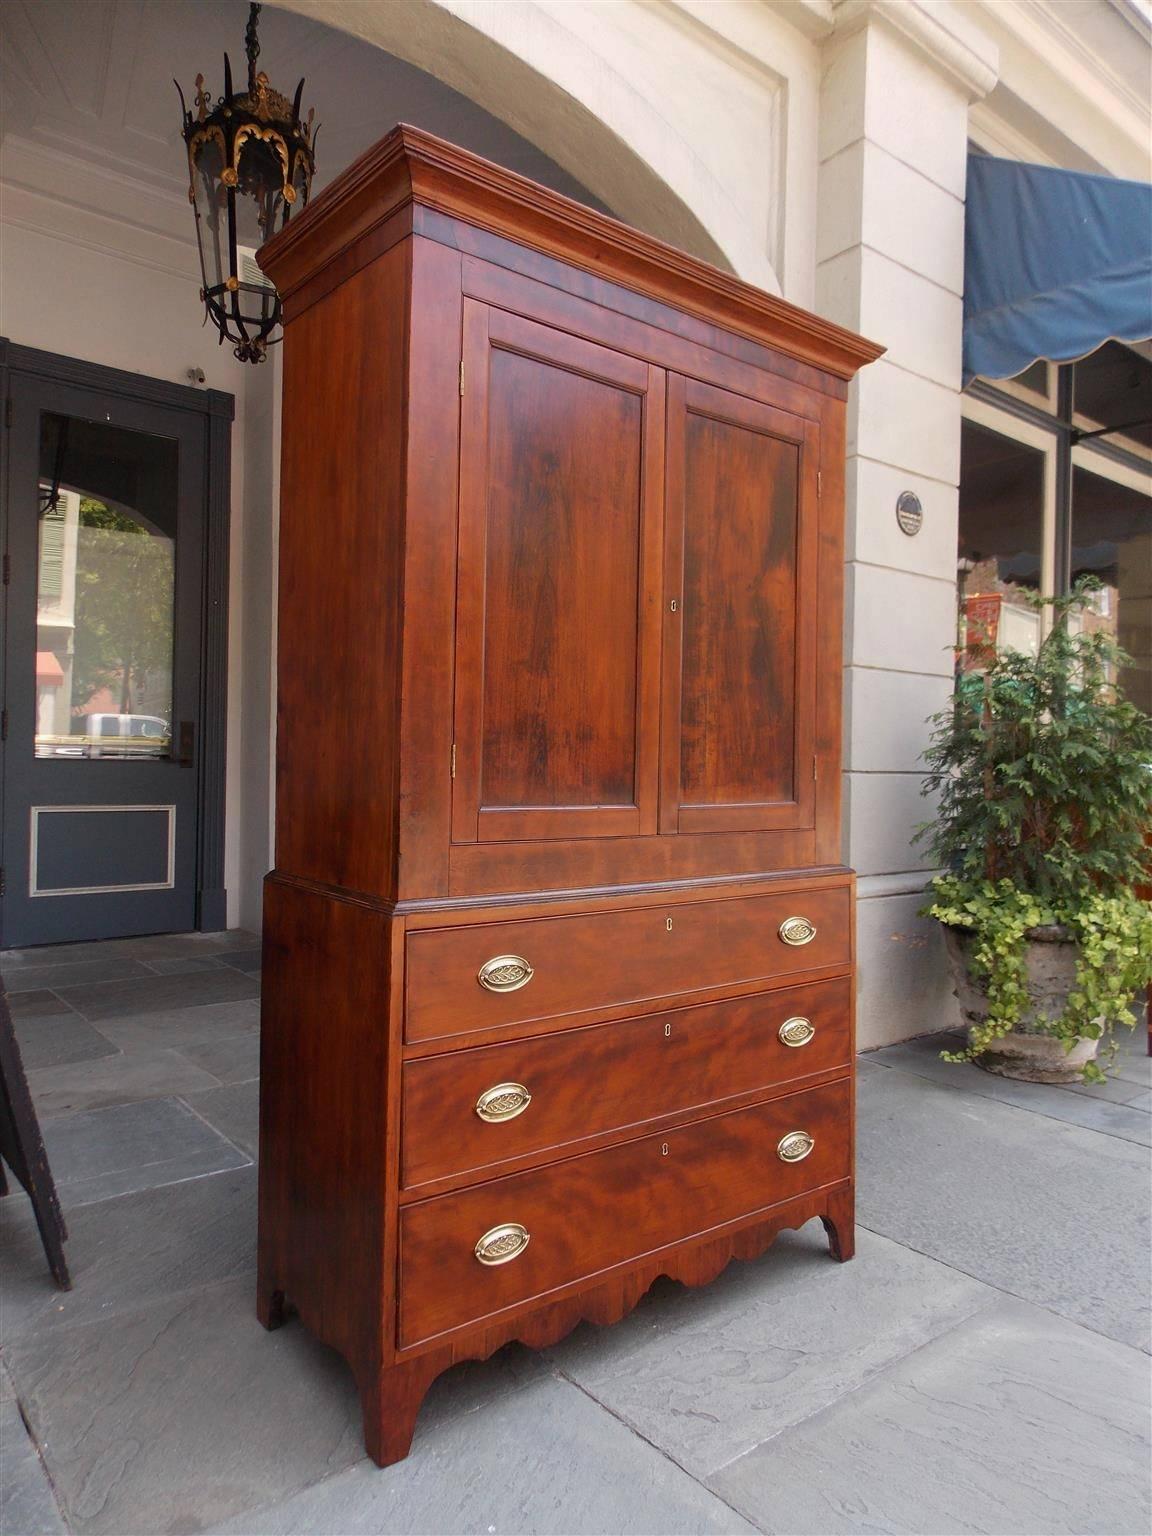 American cherry & mahogany linen press with carved molded edge cornice, upper case flanking book matched doors revealing three interior shelves. Lower case has three graduated drawers with period brasses, and terminating with a carved scalloped